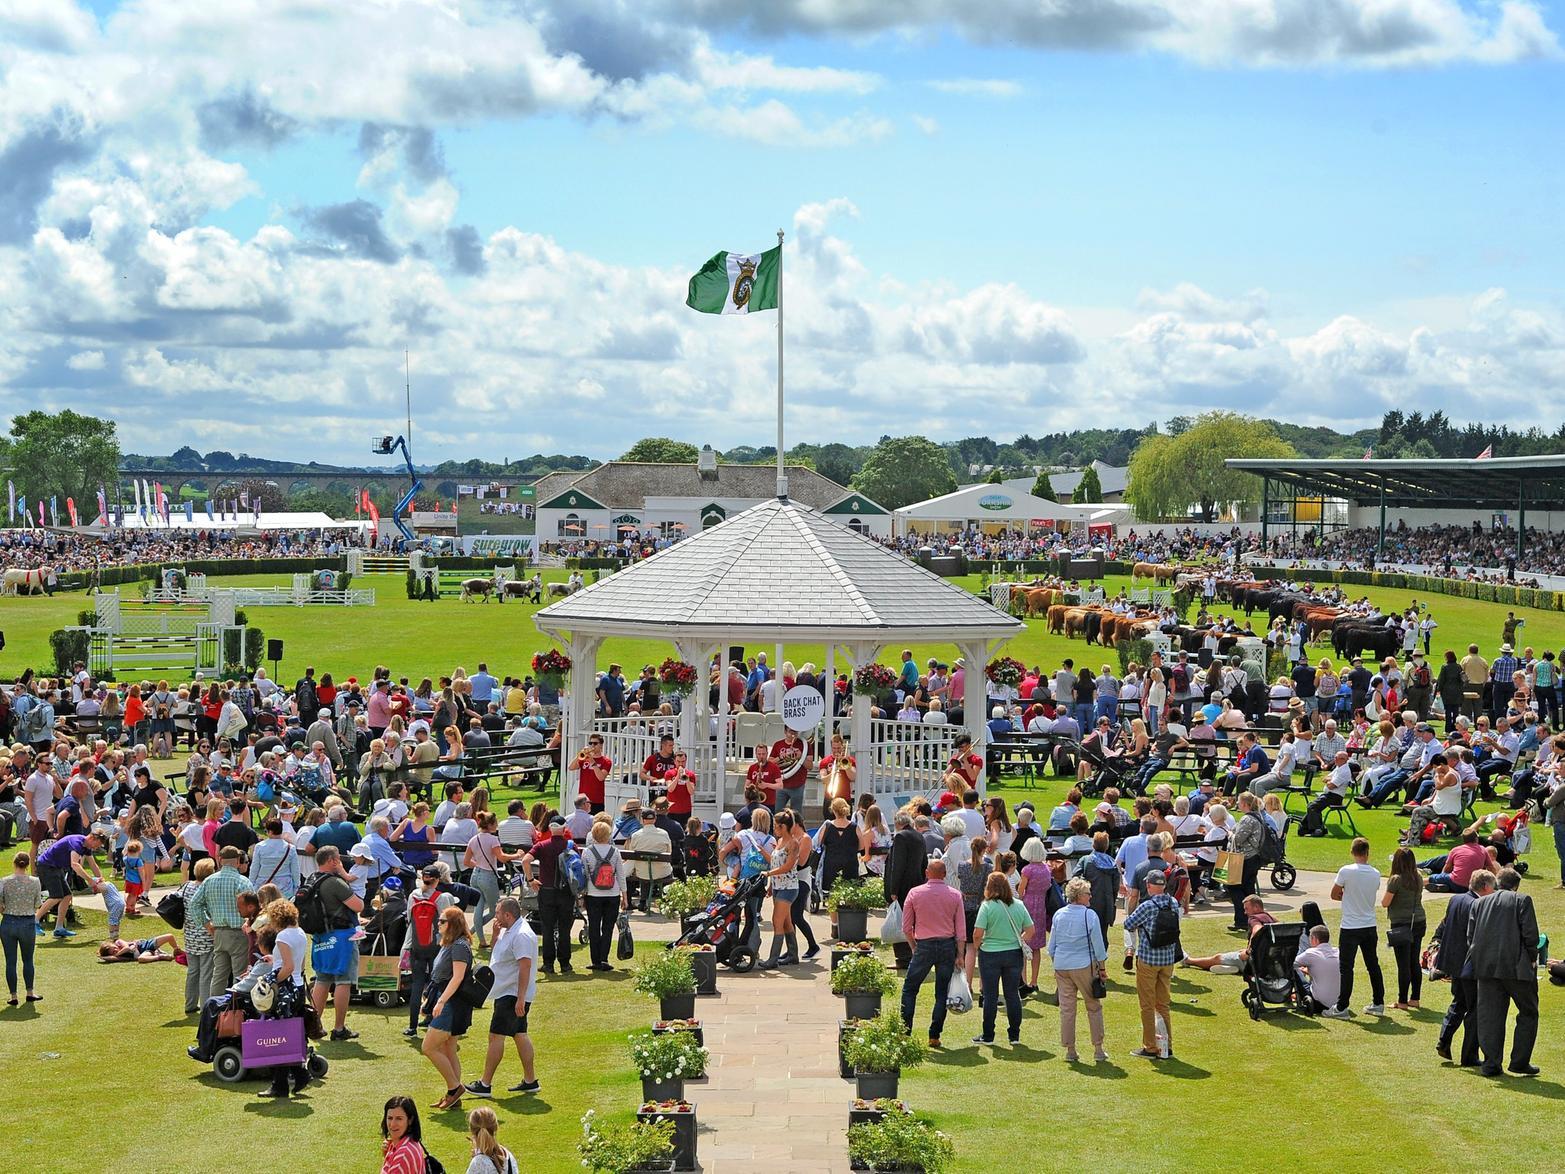 One of England's biggest agricultural shows takes place in our town, showcasing the very best of farming. And with Fodder and the Yorkshire Event Centre in the same place, what more could you want?